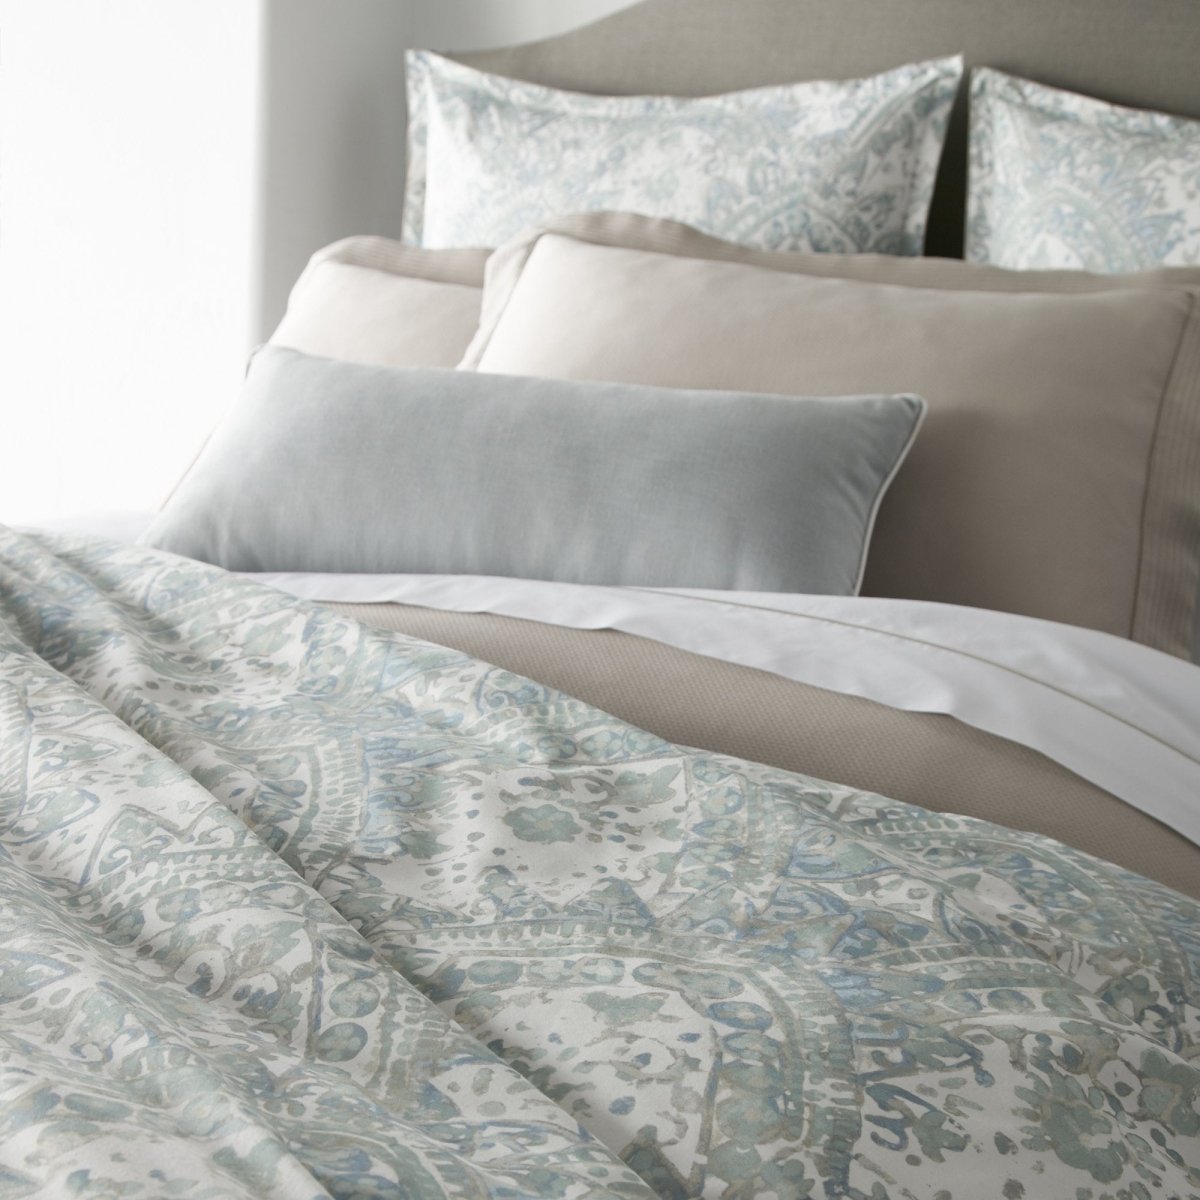 Peacock Alley Seville Bedding at Fig Linens